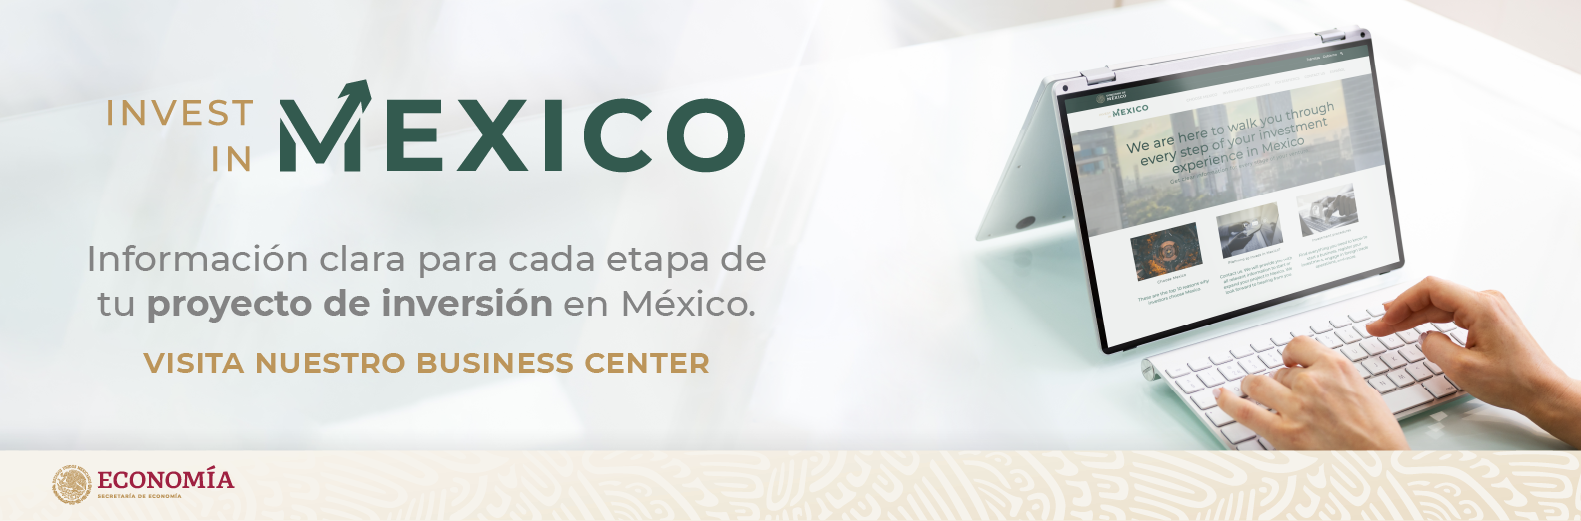 /cms/uploads/image/file/755671/web_banner-InvestInMexico.png